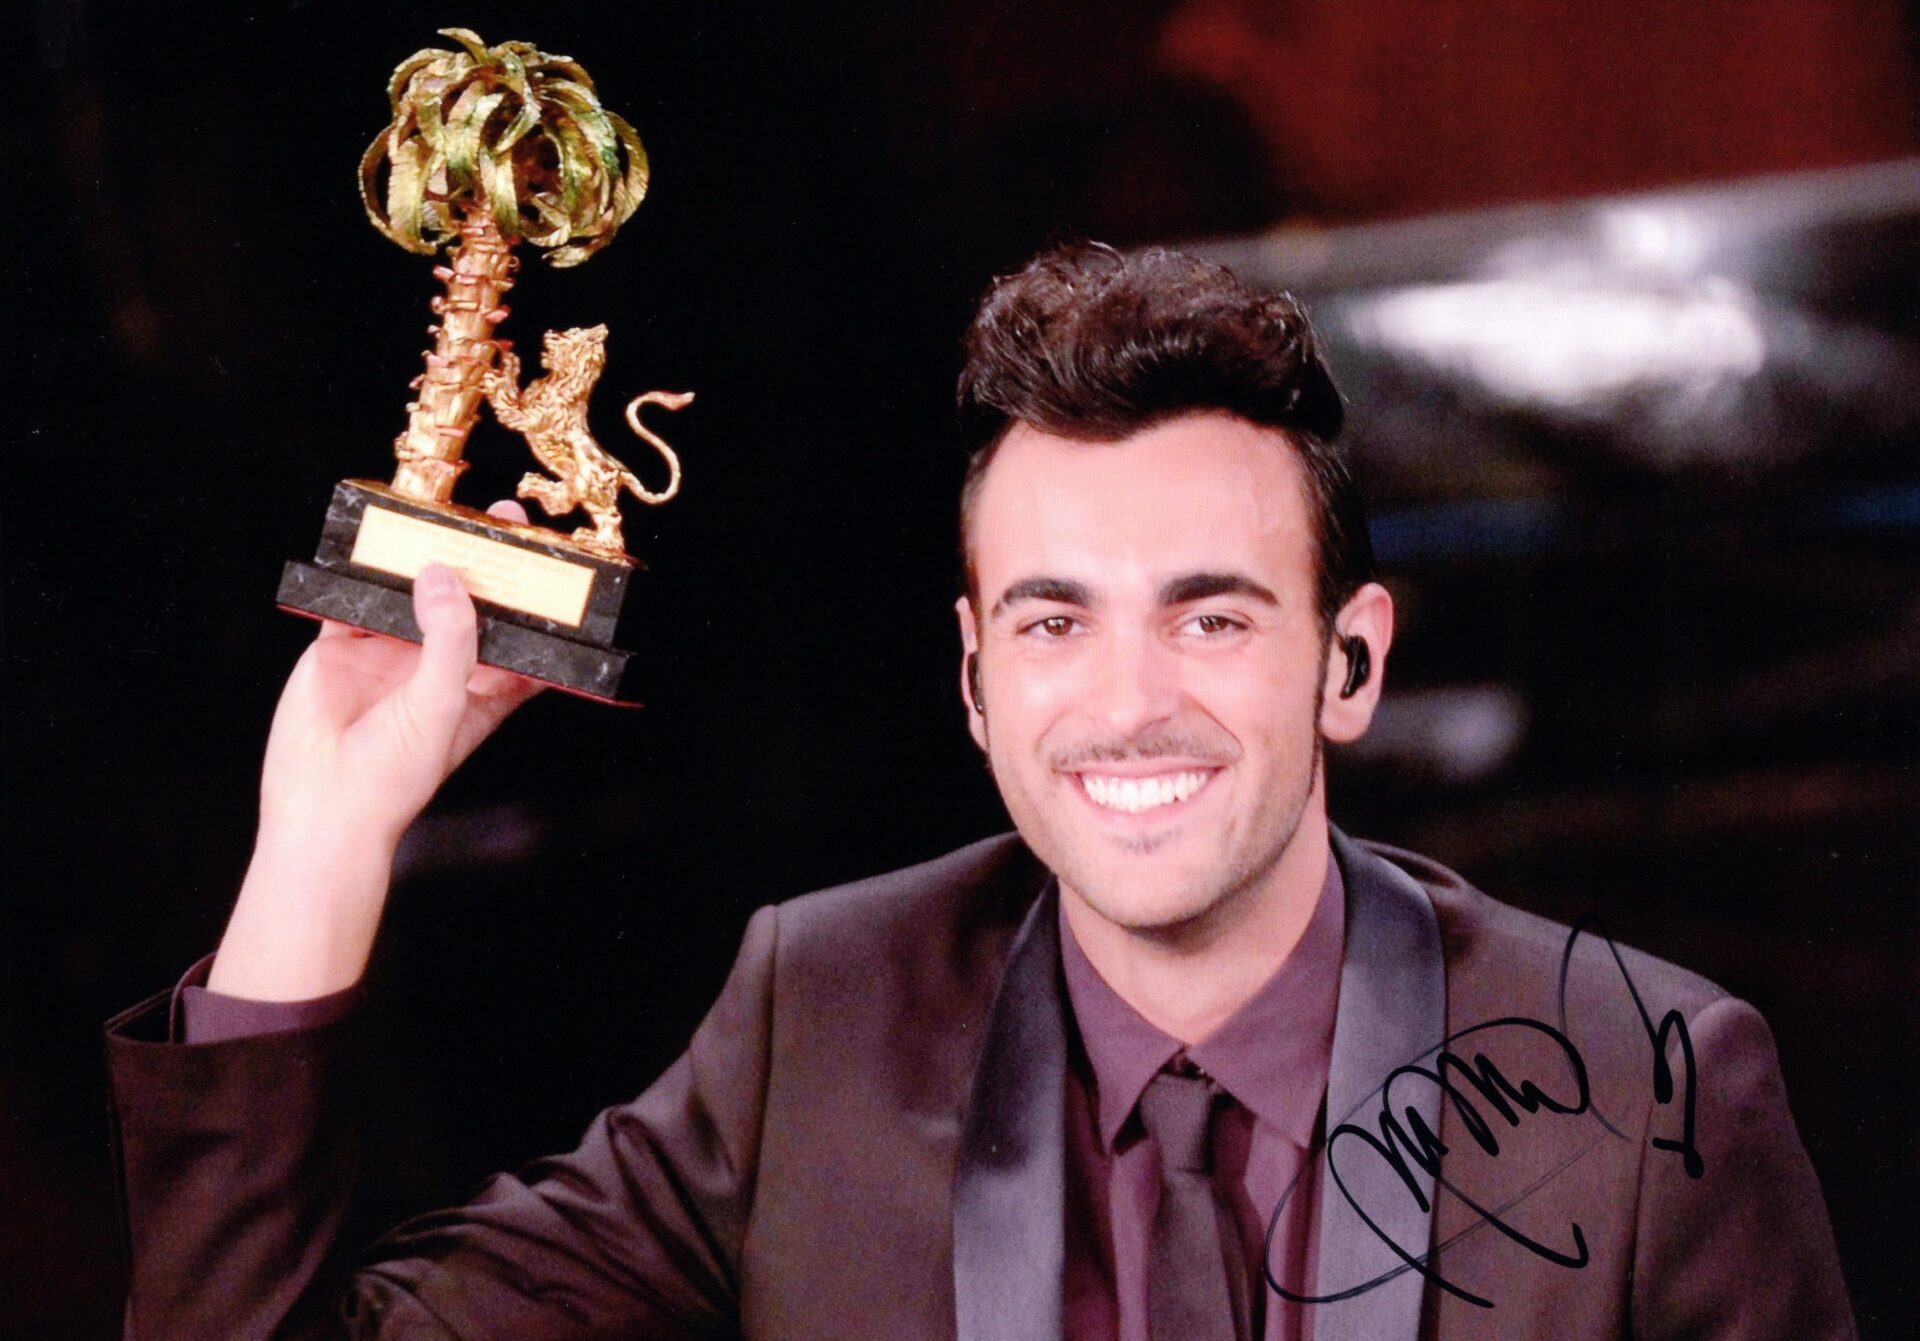 Marco Mengoni – Signed Photo - SignedForCharity